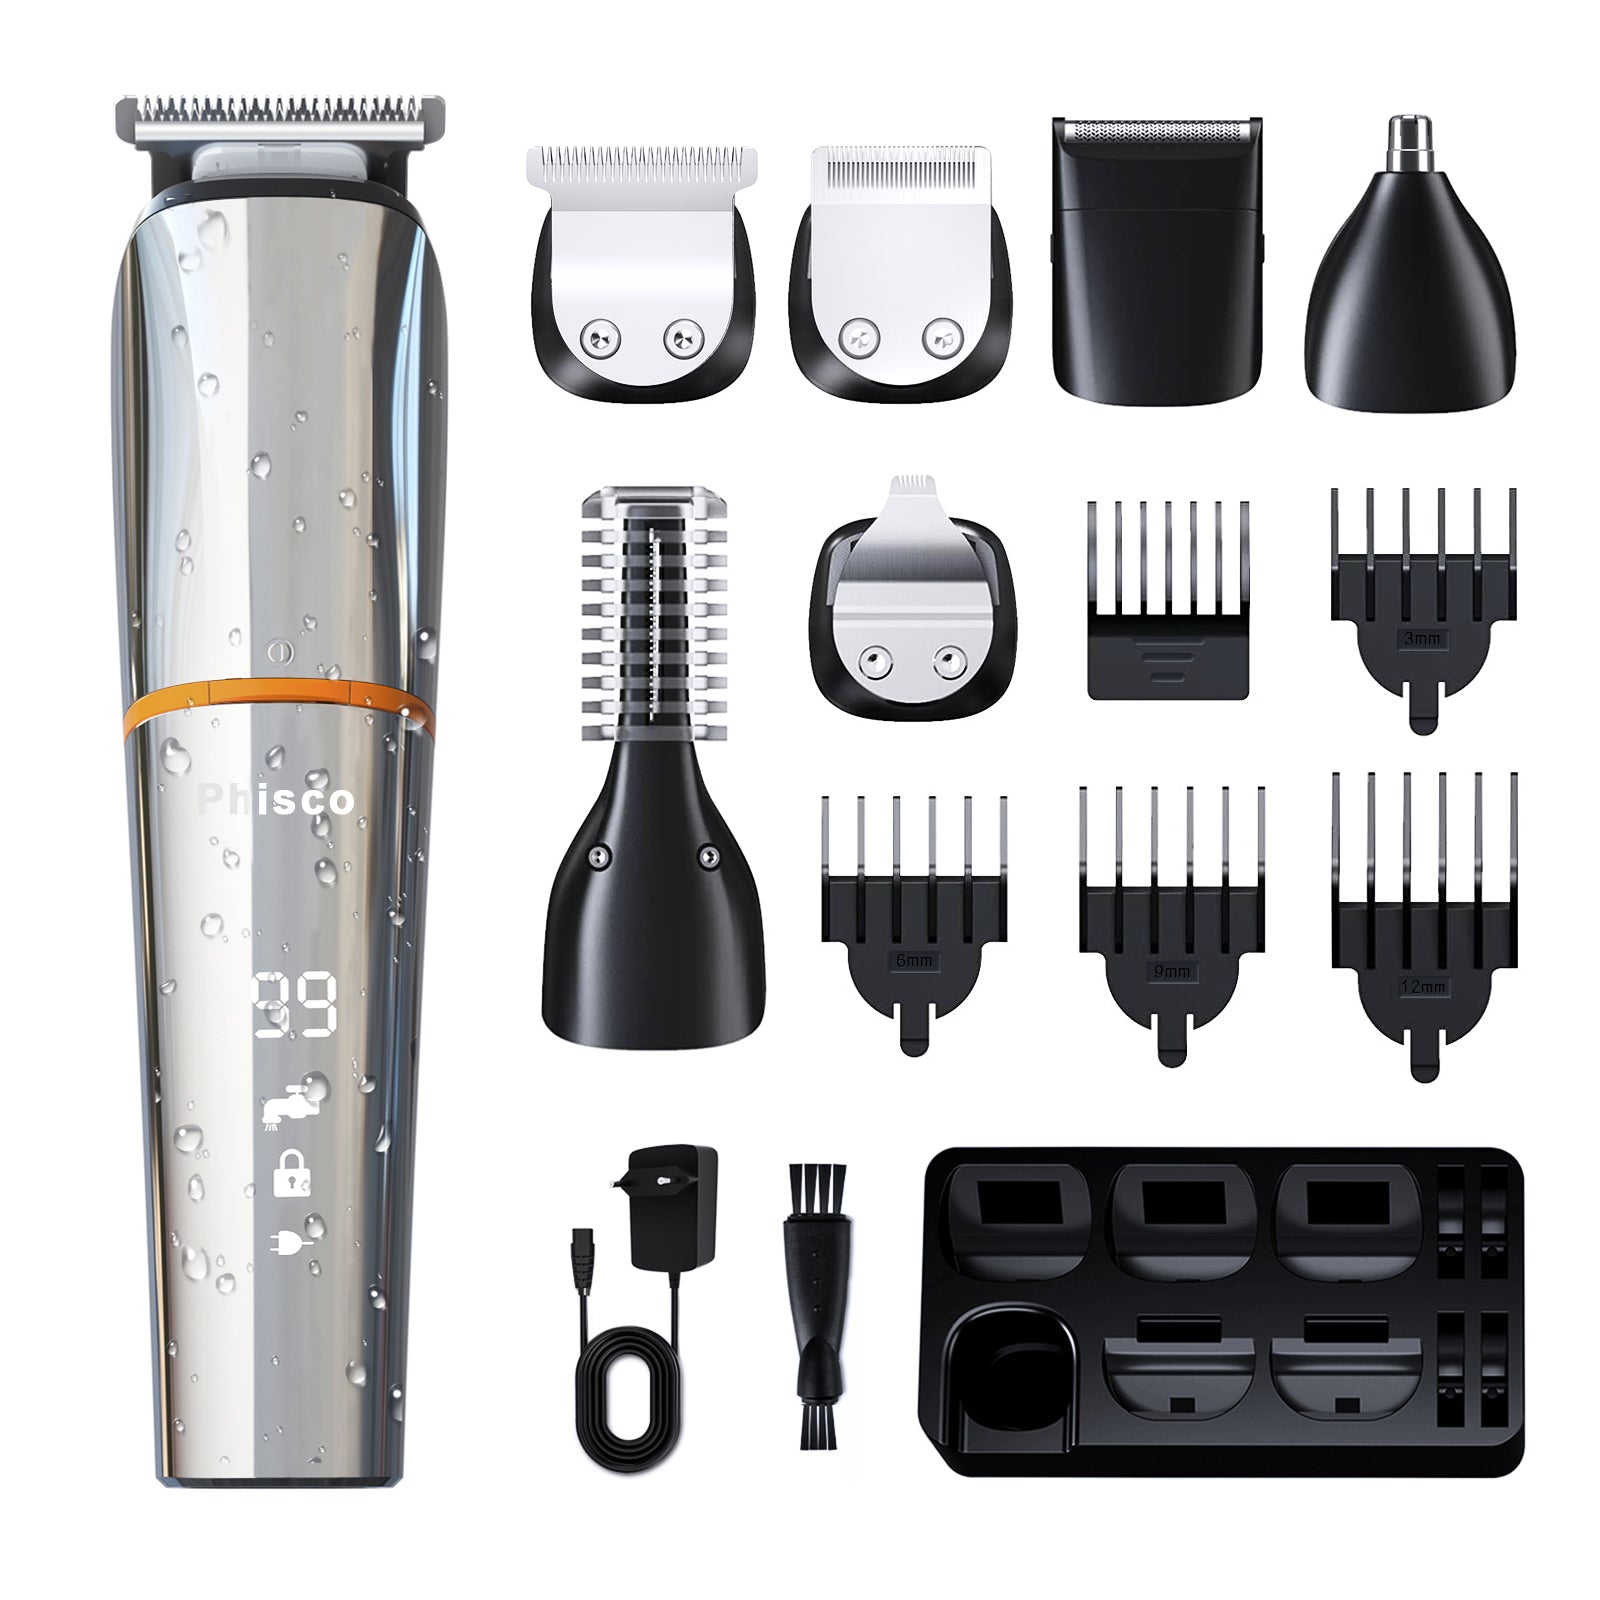 Wahl Hair Clippers for Men, 3-in-1 Cordless Head Shaver Men's Hair Clippers in Storage Case, Gifts for Men, Nose Hair Trimmer for Men, Hair